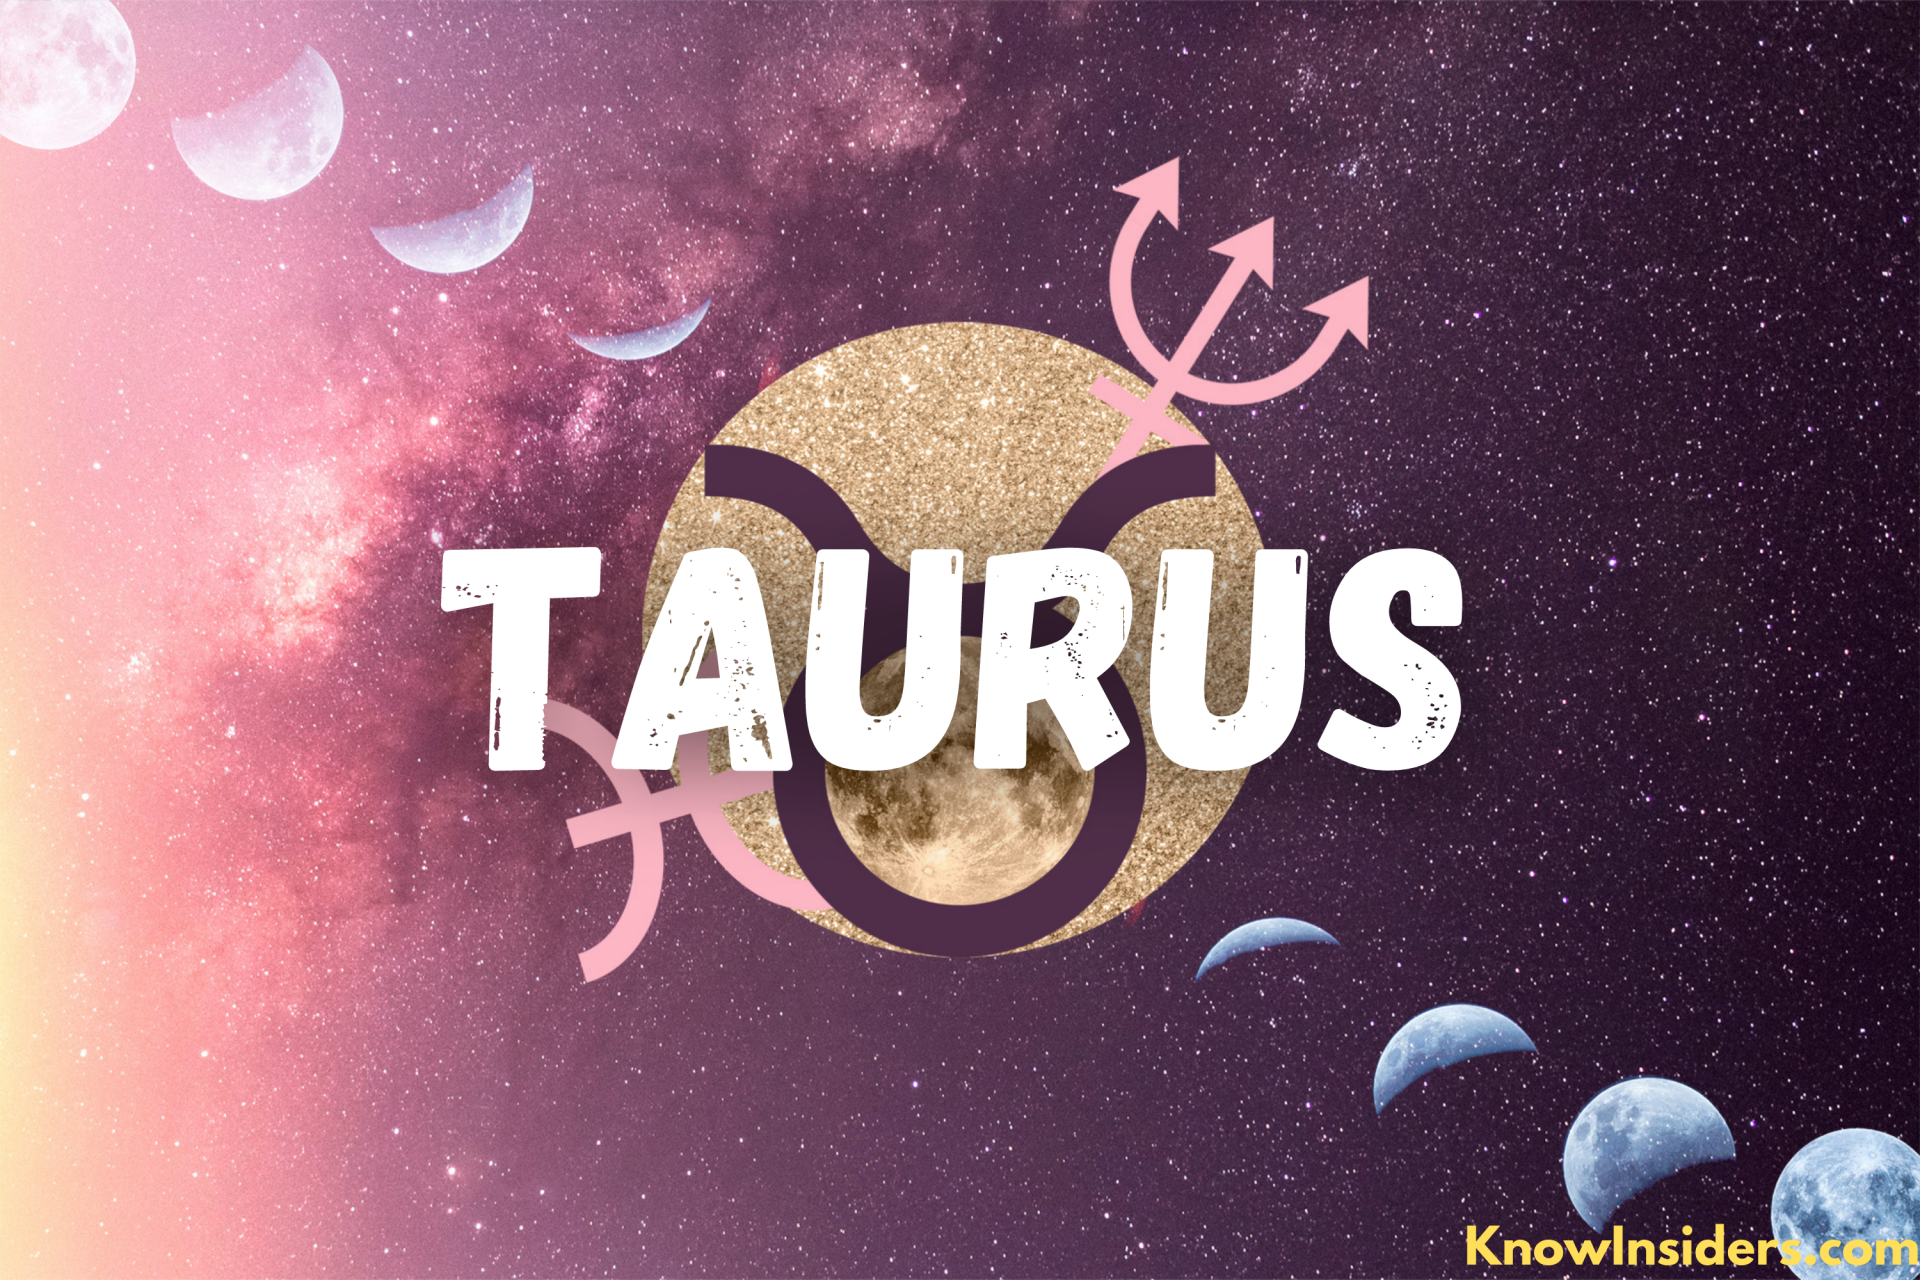 Taurus Horoscope September 2021: Monthly Predictions for Love, Financial, Career and Health